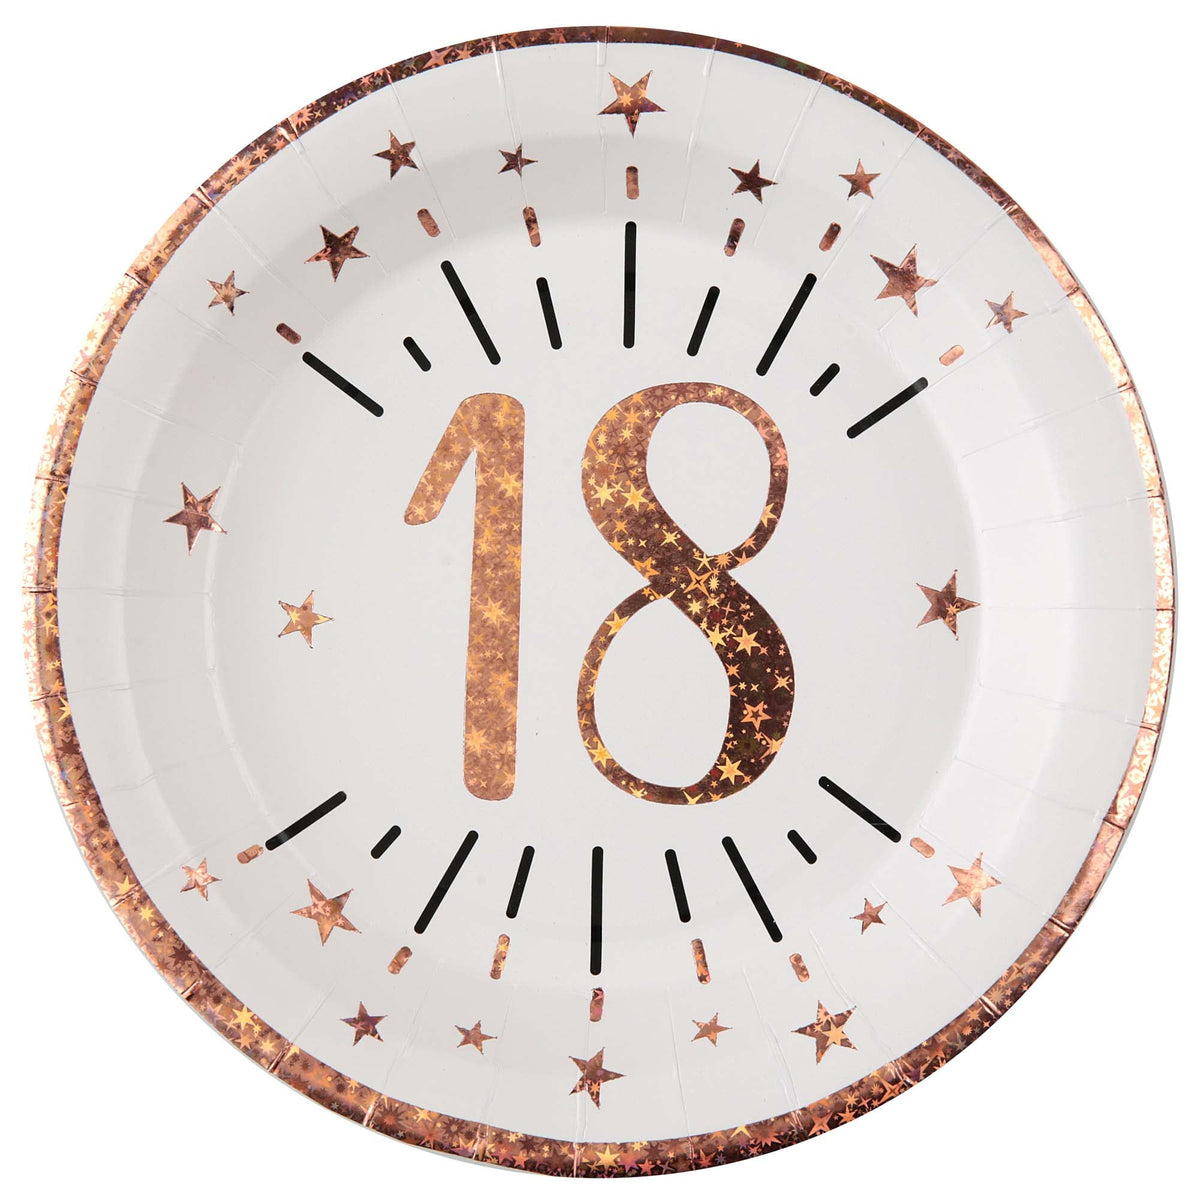 SANTEX Age Specific Birthday Rose Gold 18th Birthday Large Round Lunch Paper Plates, 9 Inches, 10 Count 3660380069829